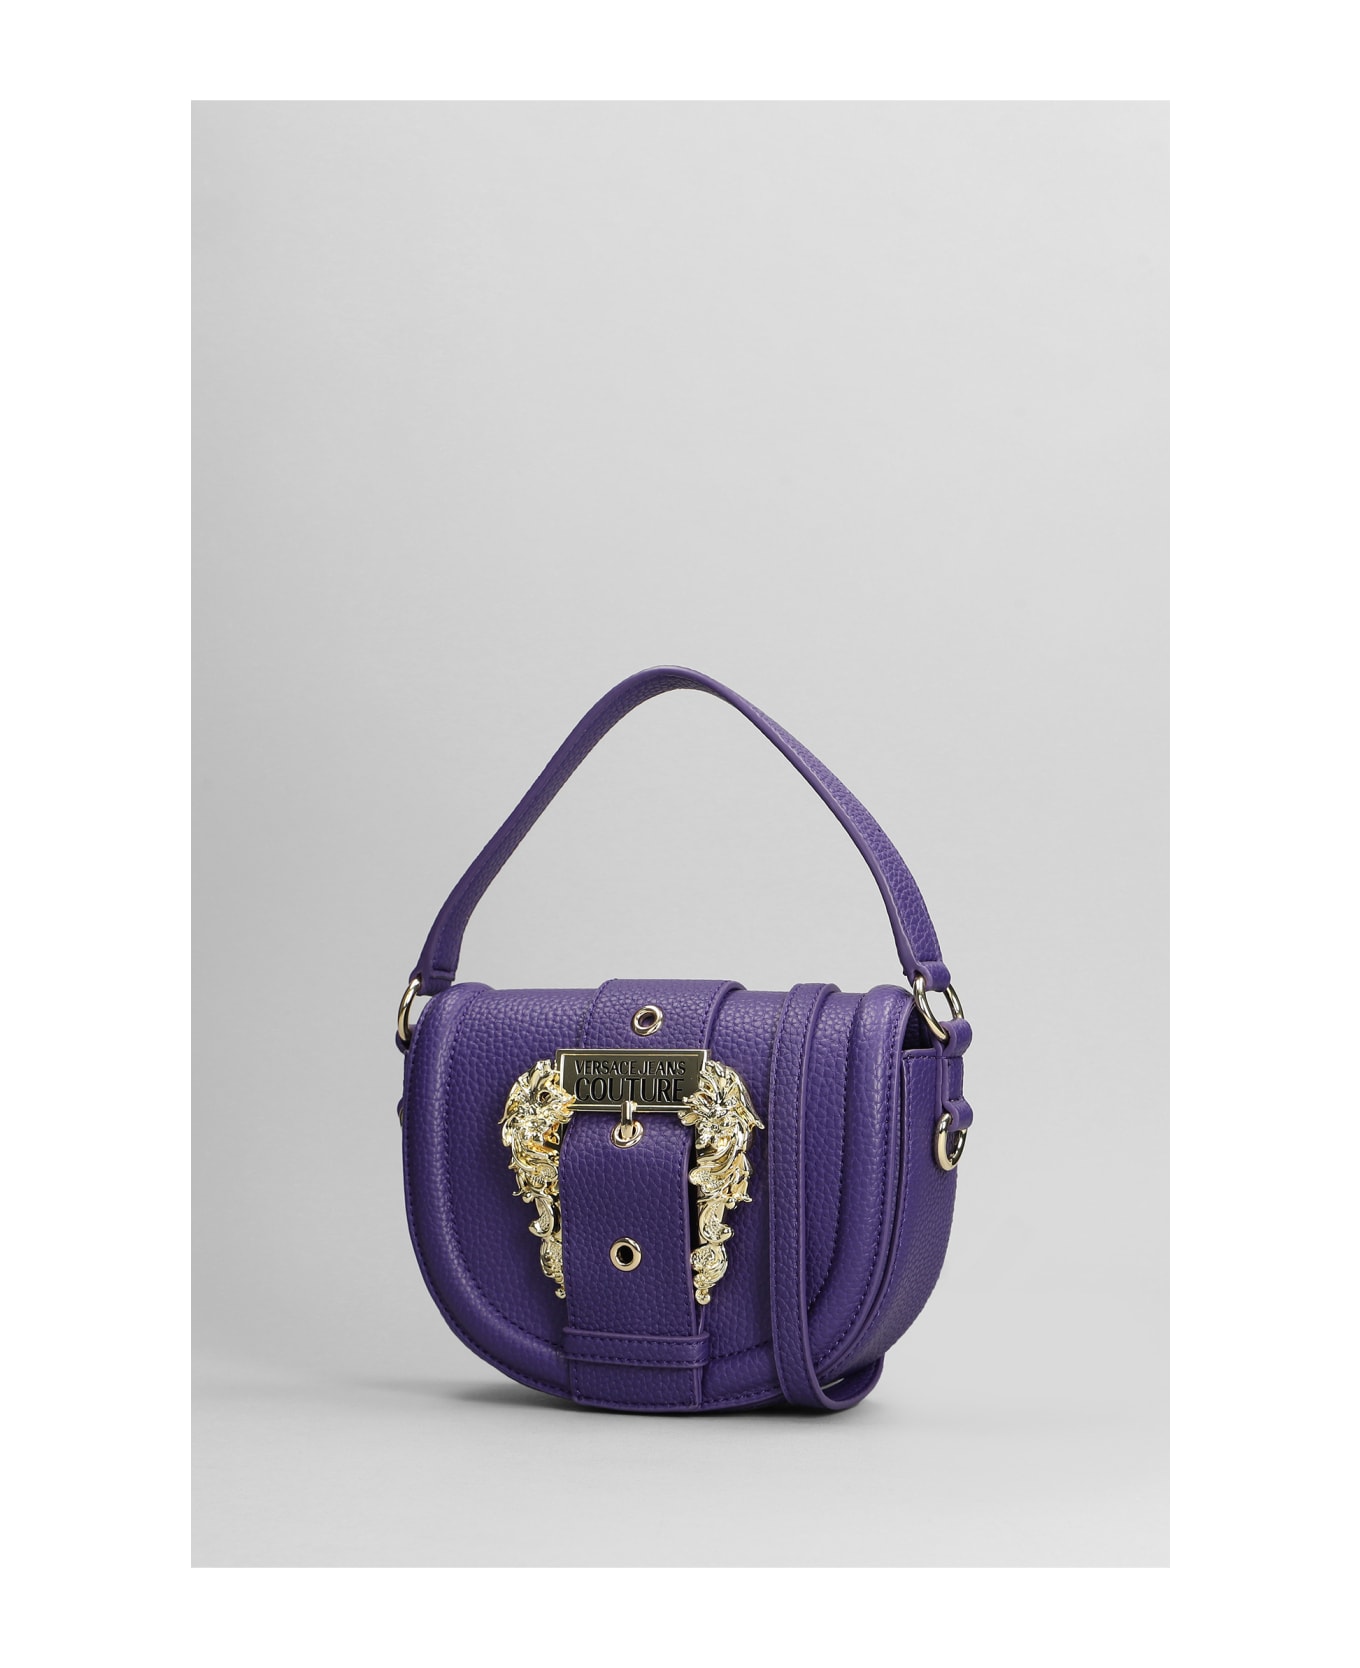 Versace Jeans Couture Hand Bag - PURPLE